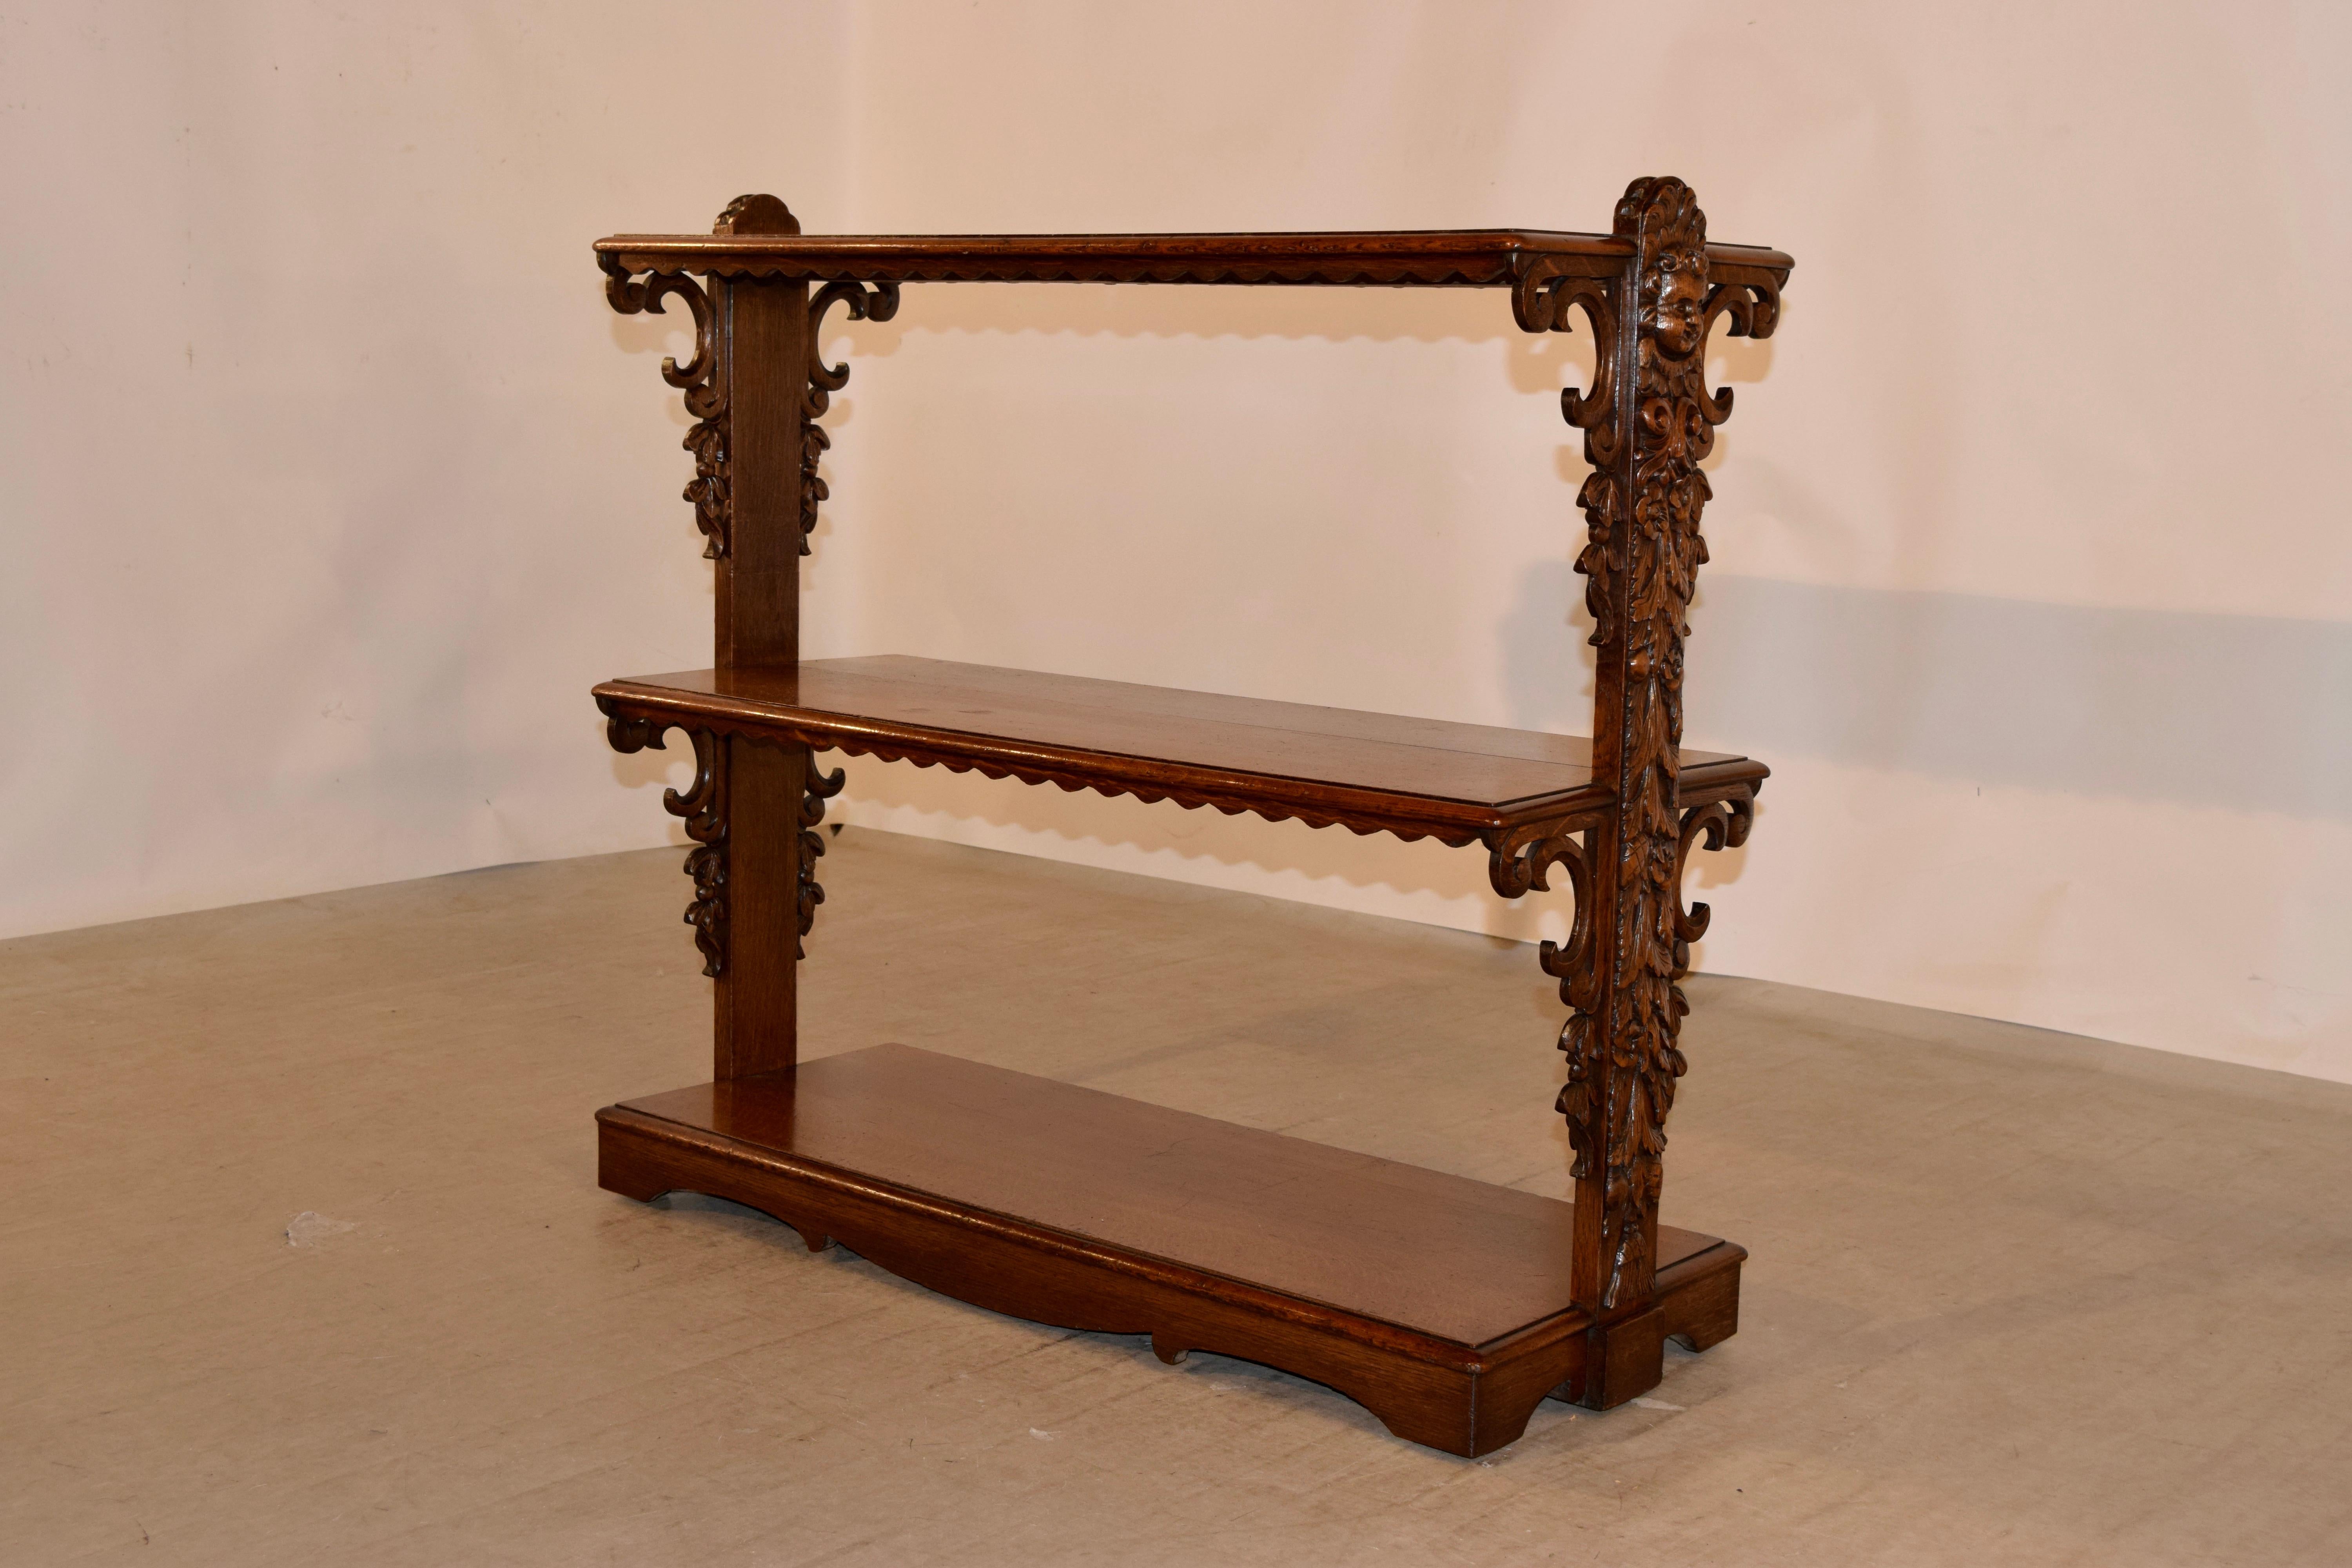 19th century oak shelf from France with three shelves, all with beveled edges and scalloped aprons. The shelves are joined on the sides by wonderfully hand carved central supports and gorgeous hand carved brackets. The base is scalloped as well for